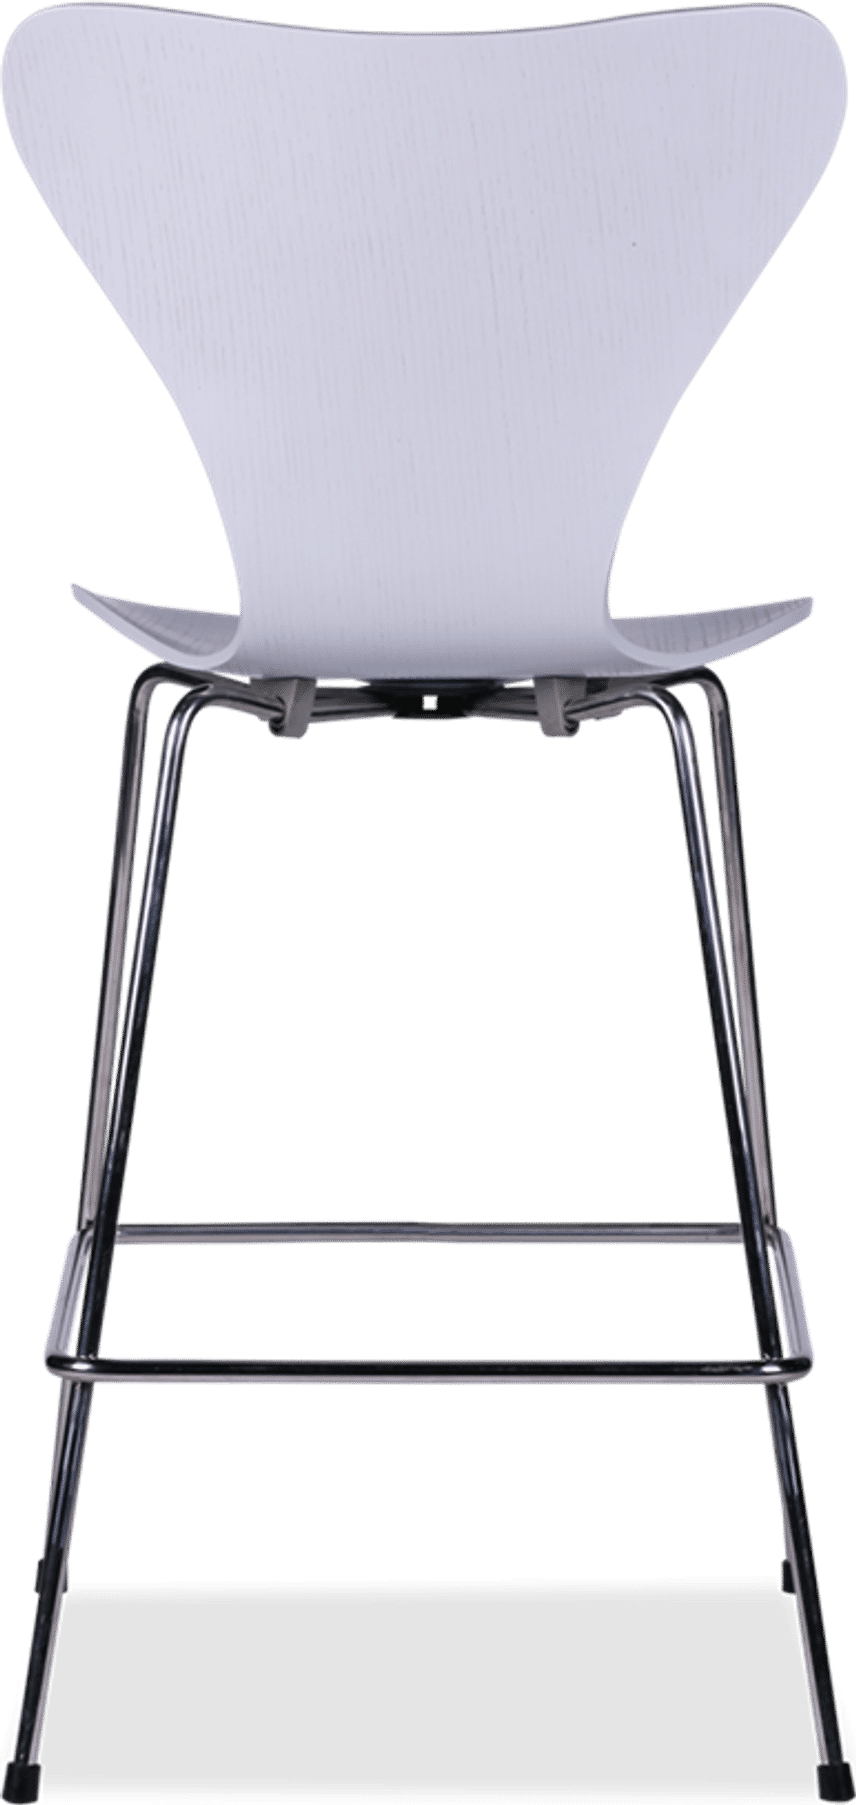 Series 7 Counter Stool Plywood/White image.